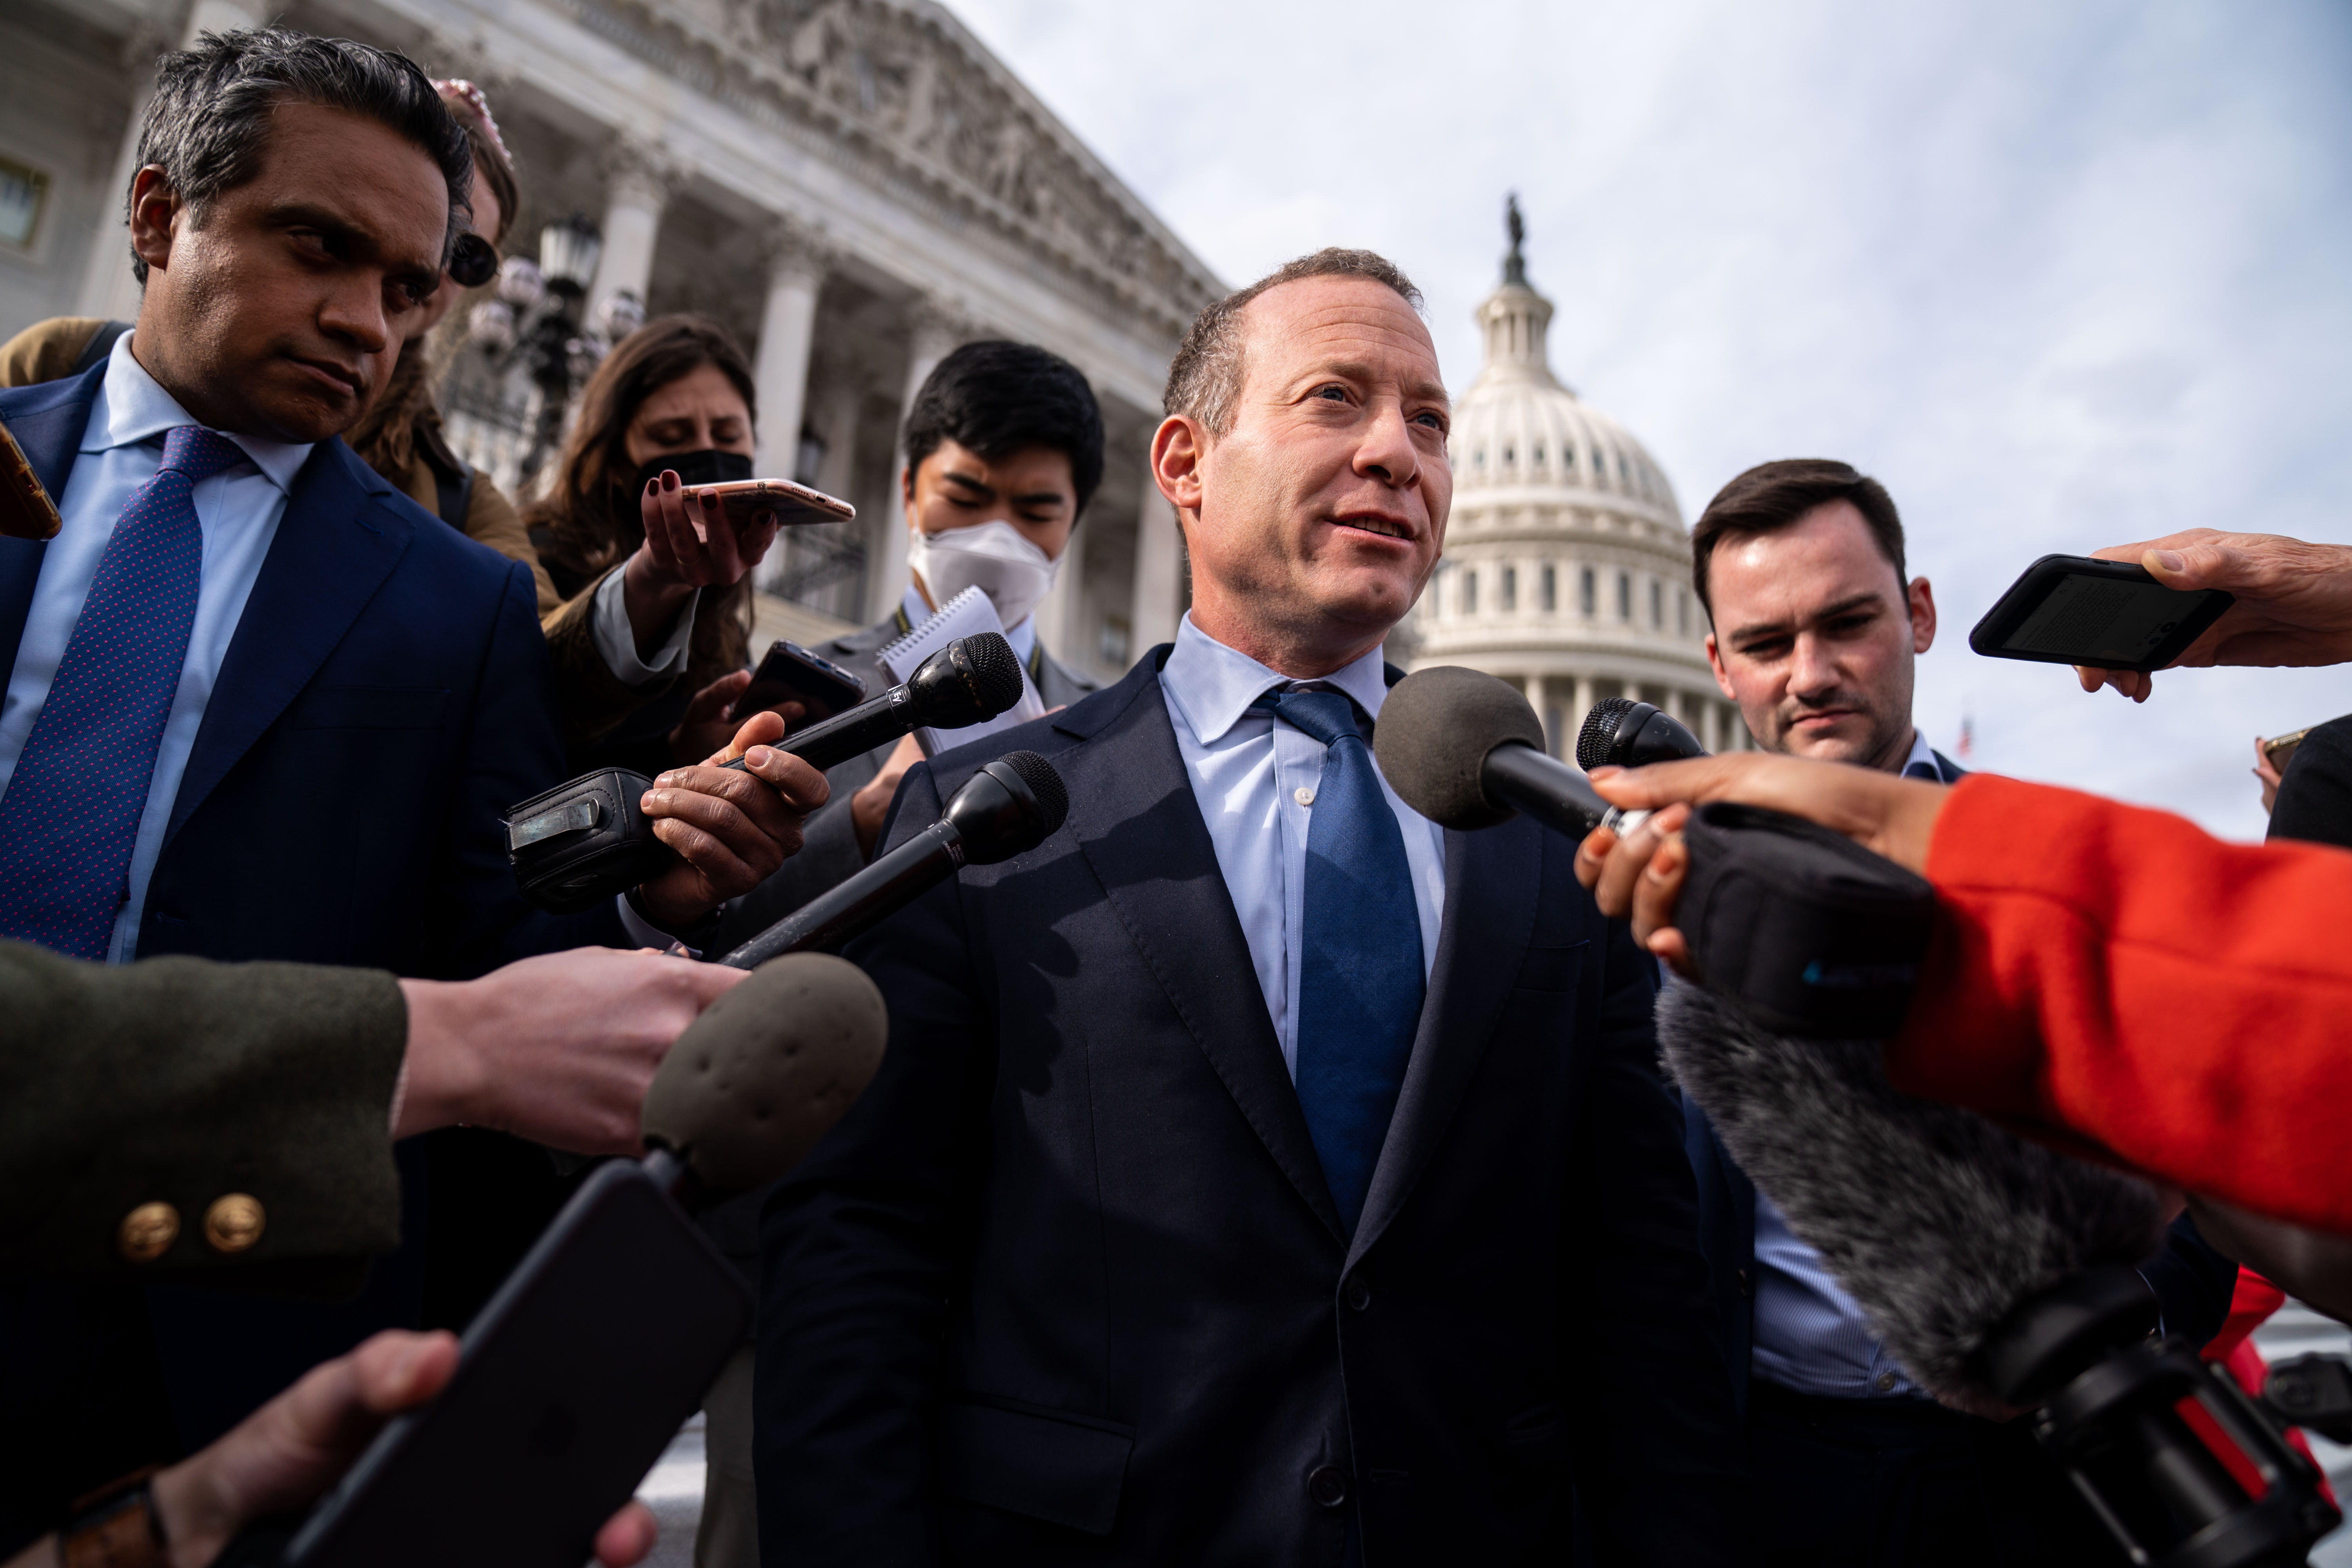 Reporters with mics surround Representtive Josh Gottheimer as the Capitol dome looms in the background.